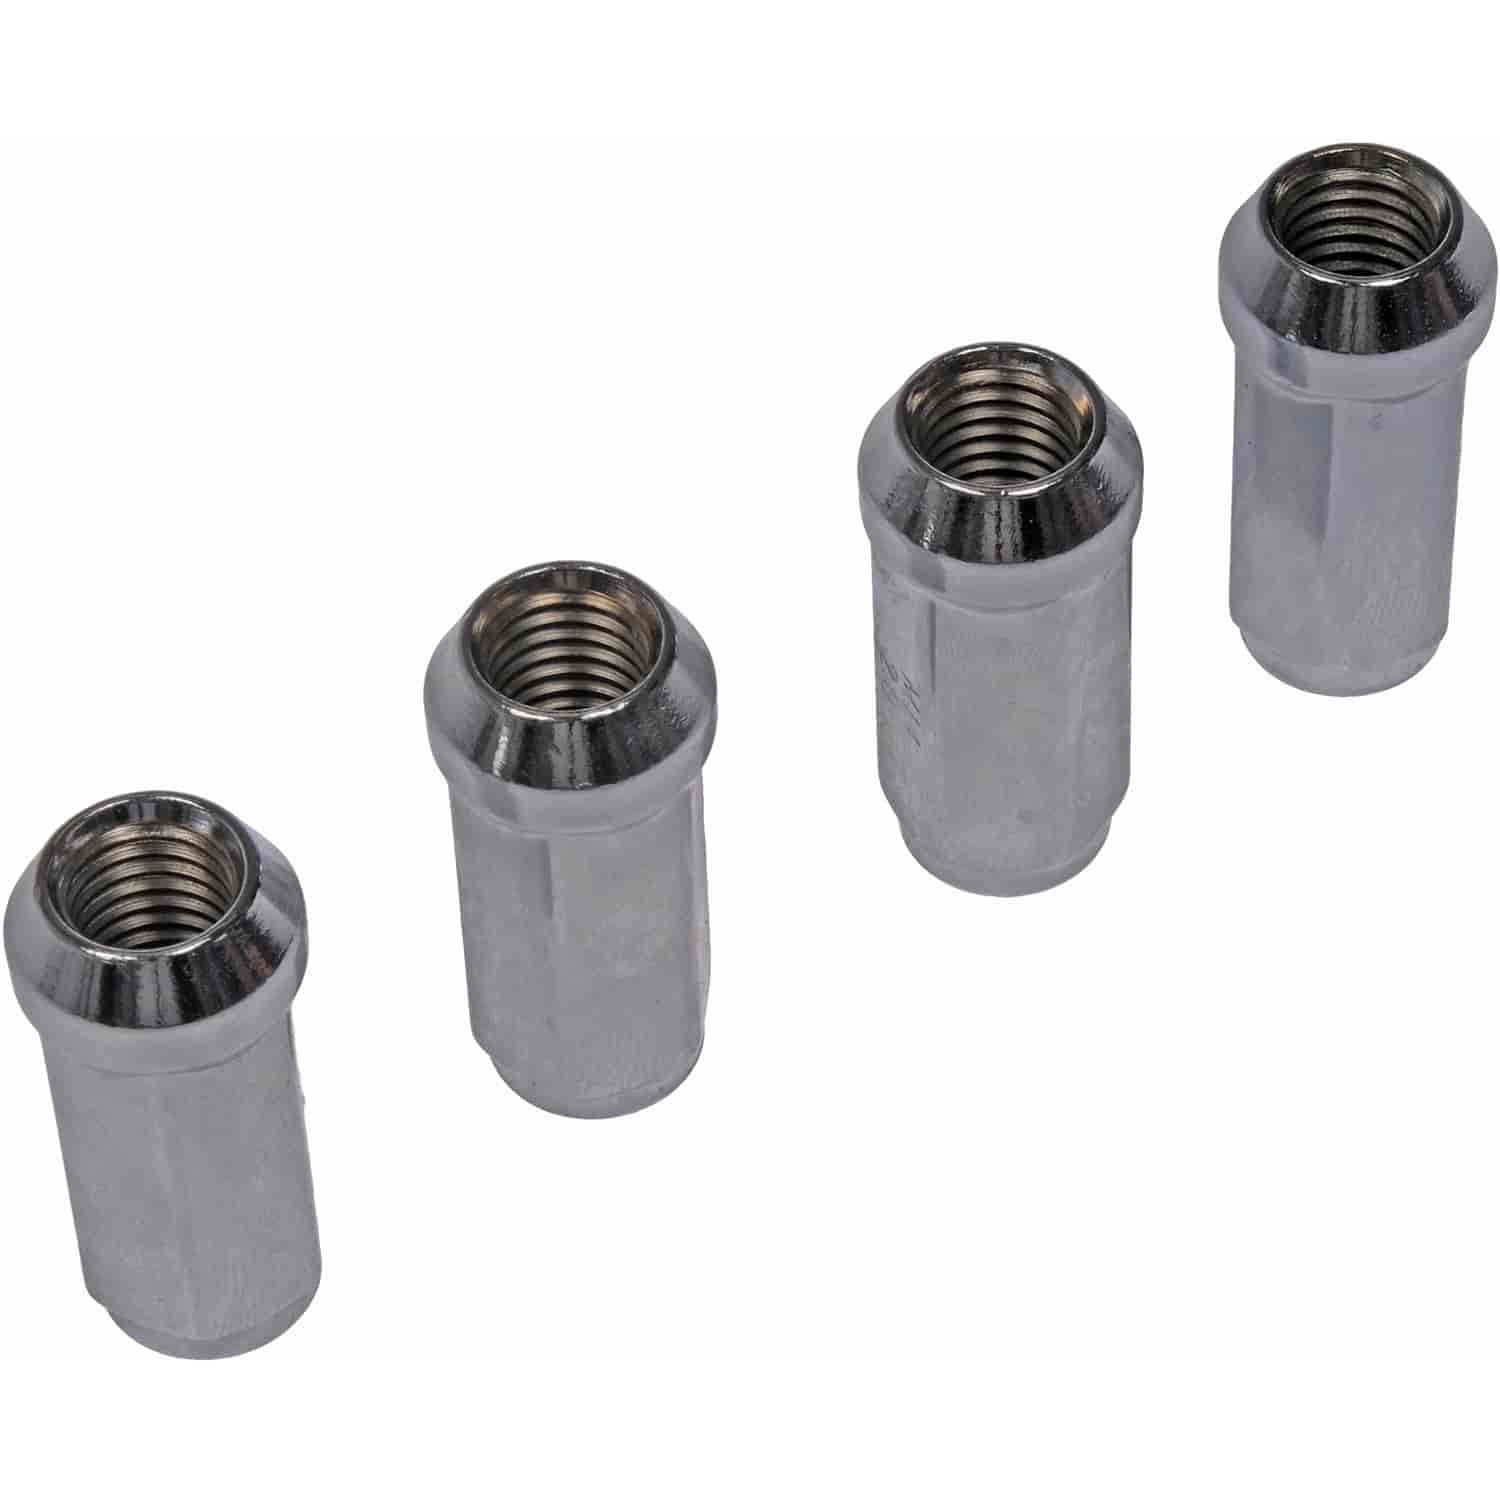 Wheel Nuts 1999-2012 Ford, 2000-2012 Lincoln M14-2.0